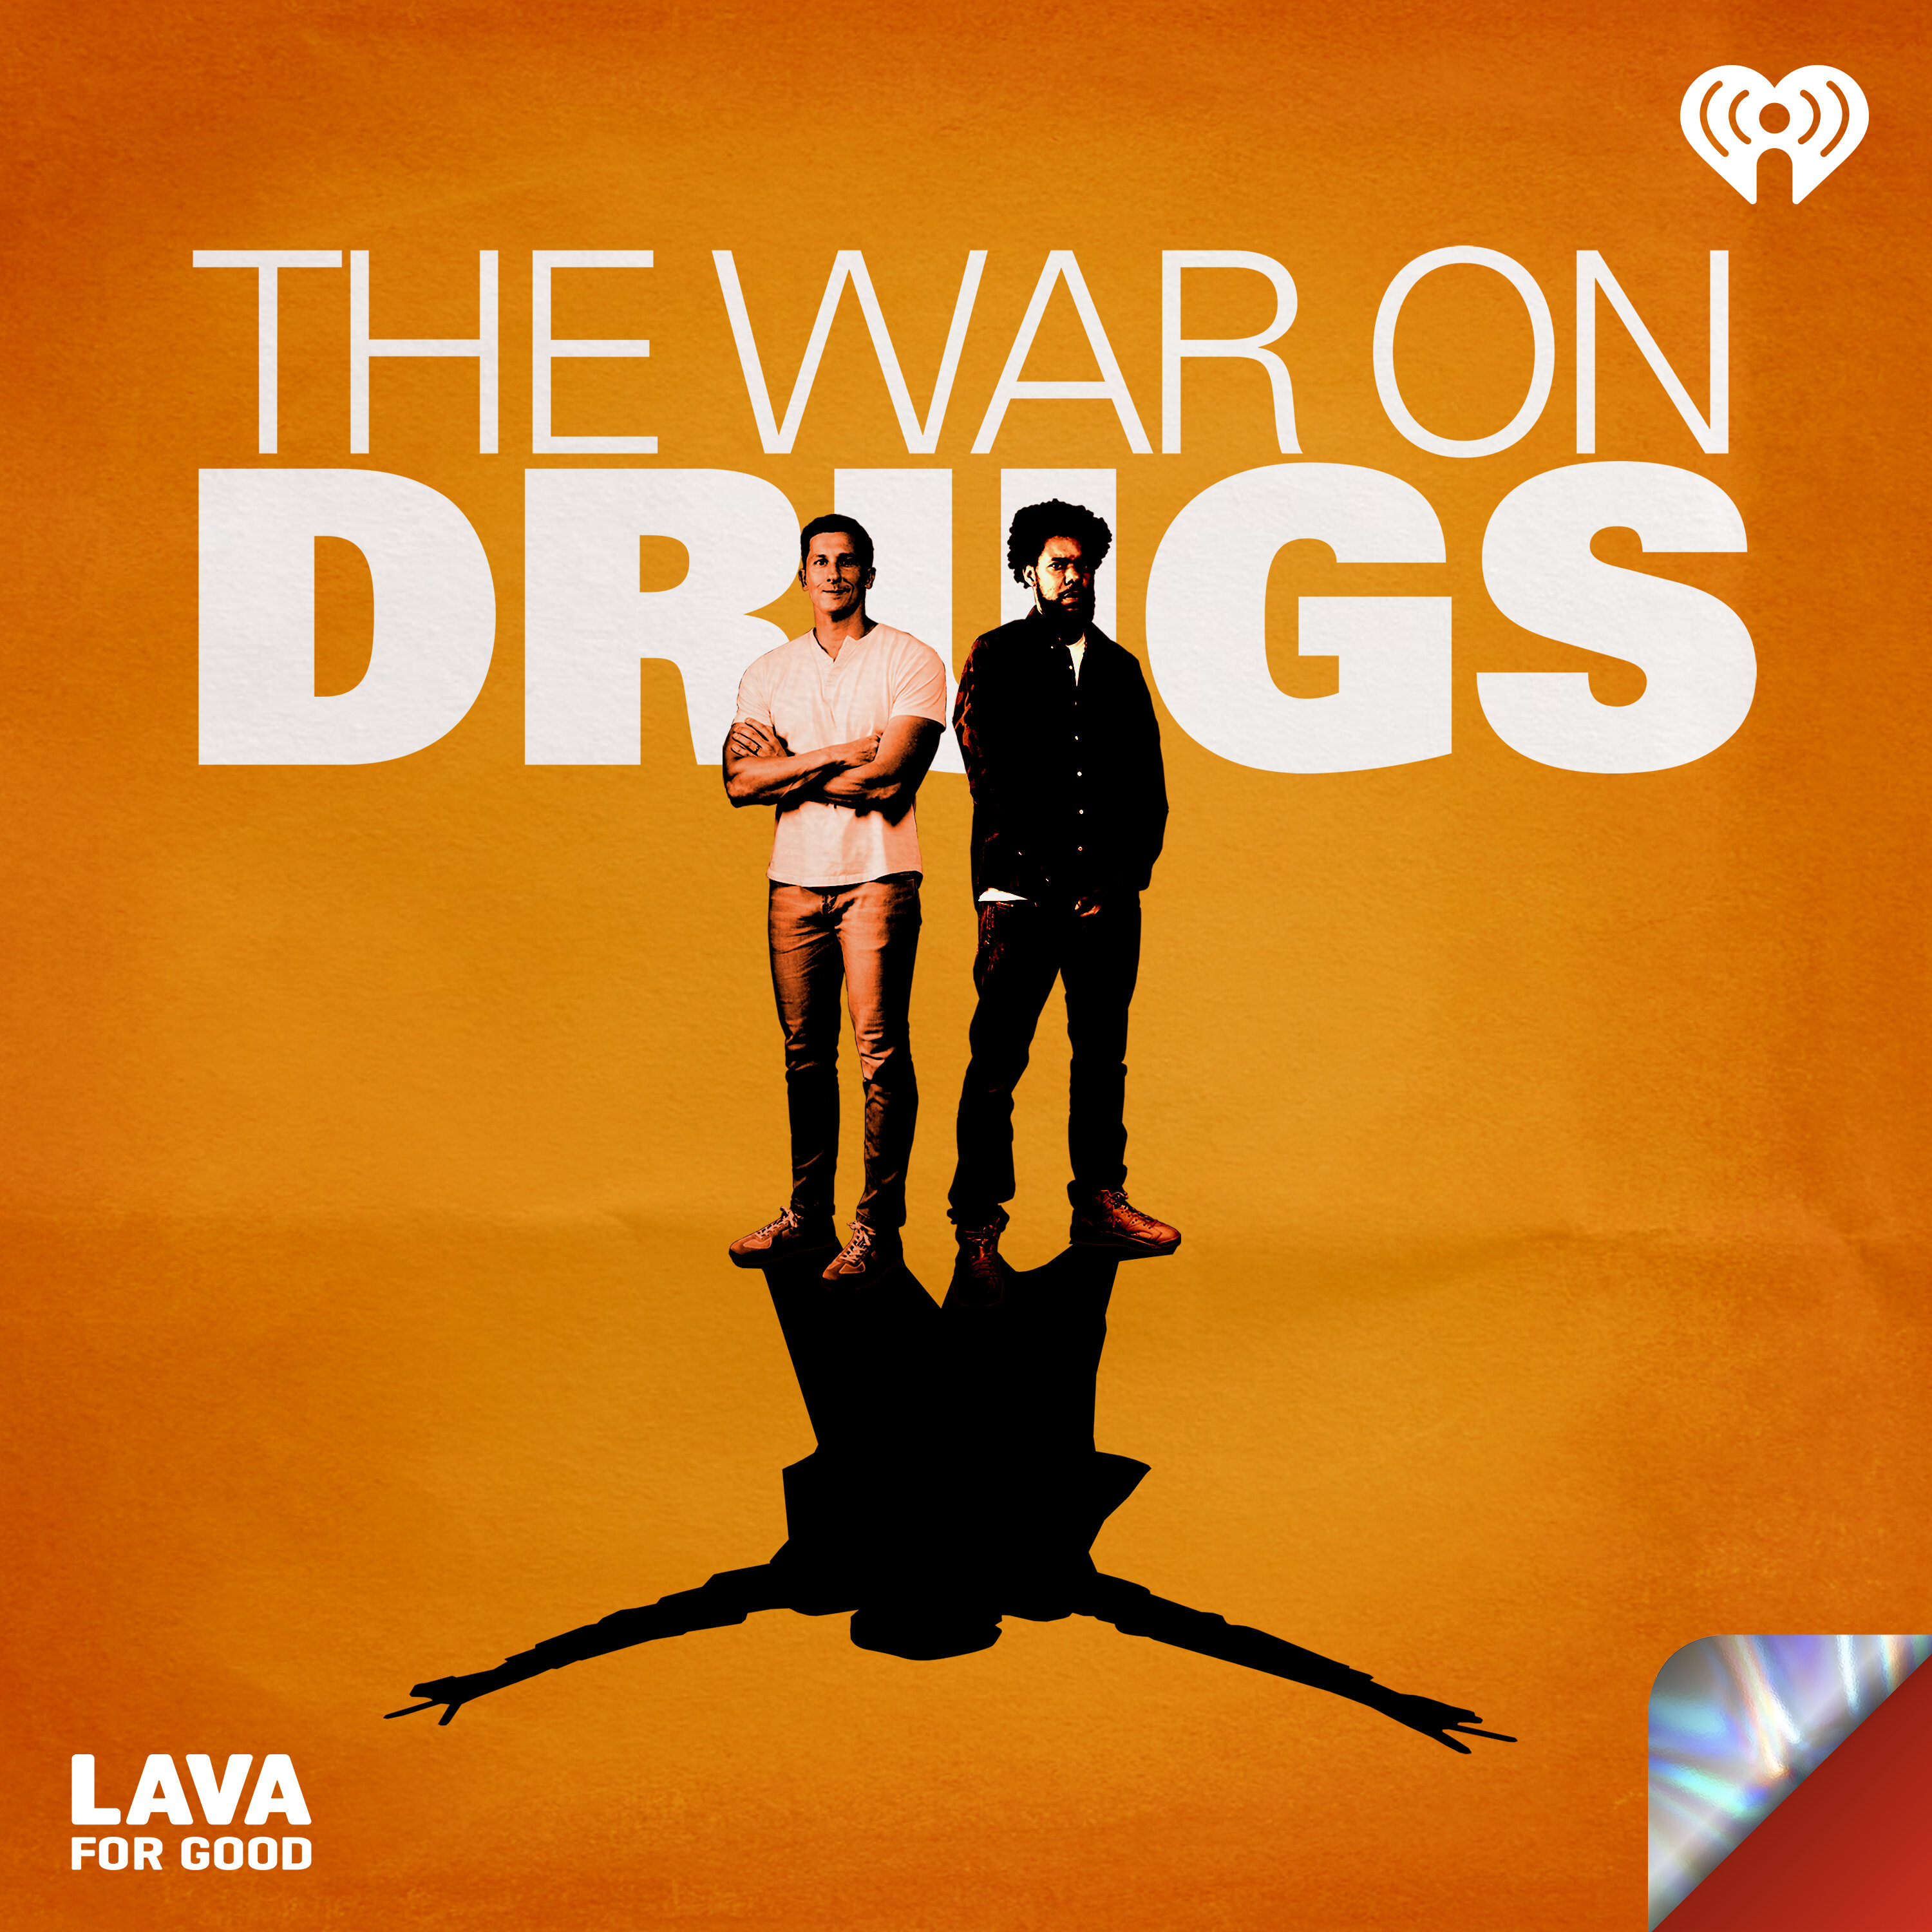 Introducing: The War on Drugs